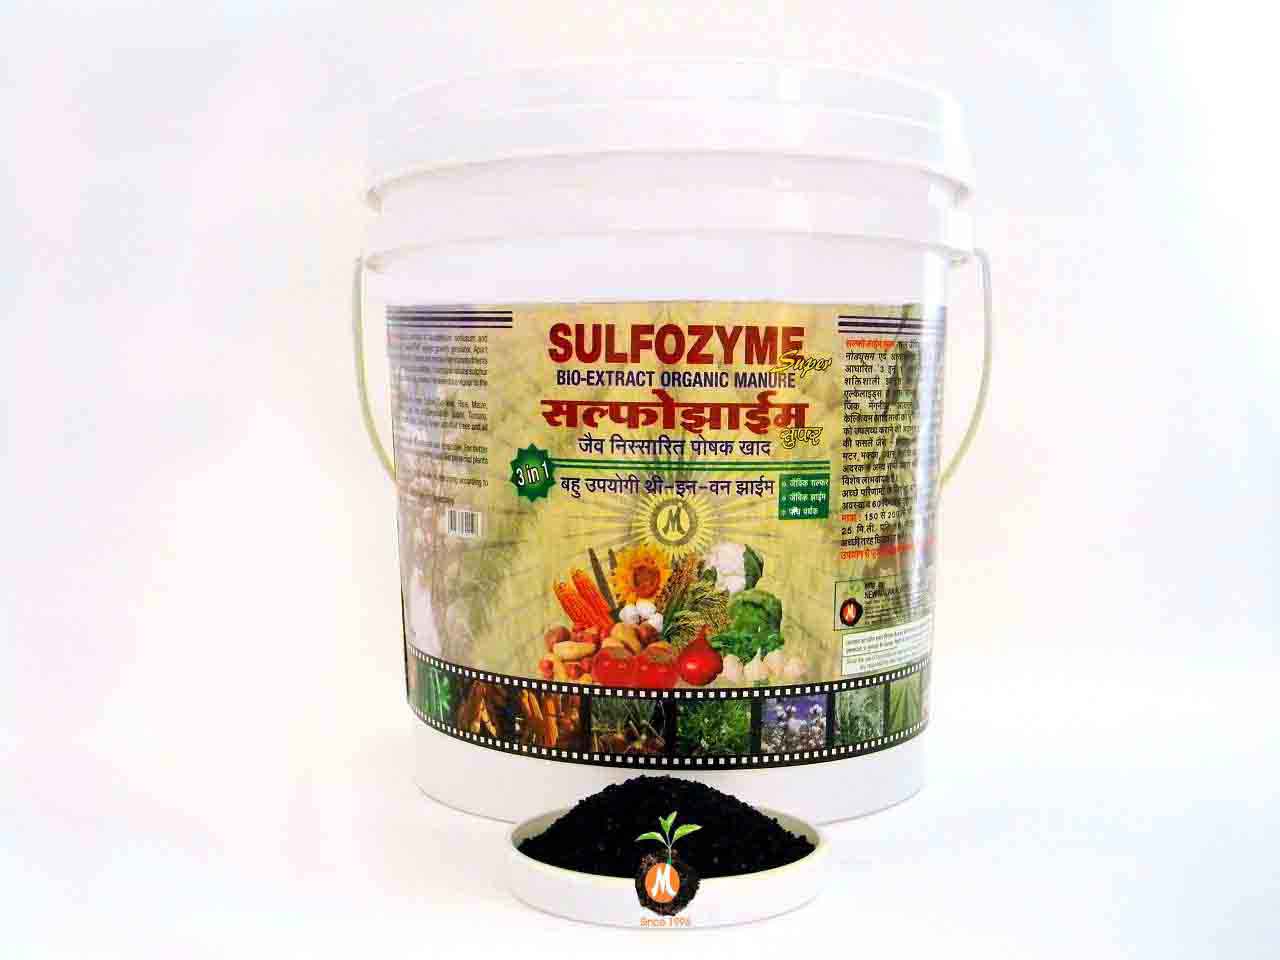 Zyme Granules bio fertilizers with neem, seaweed and sulfur for plants, crops and vegetables